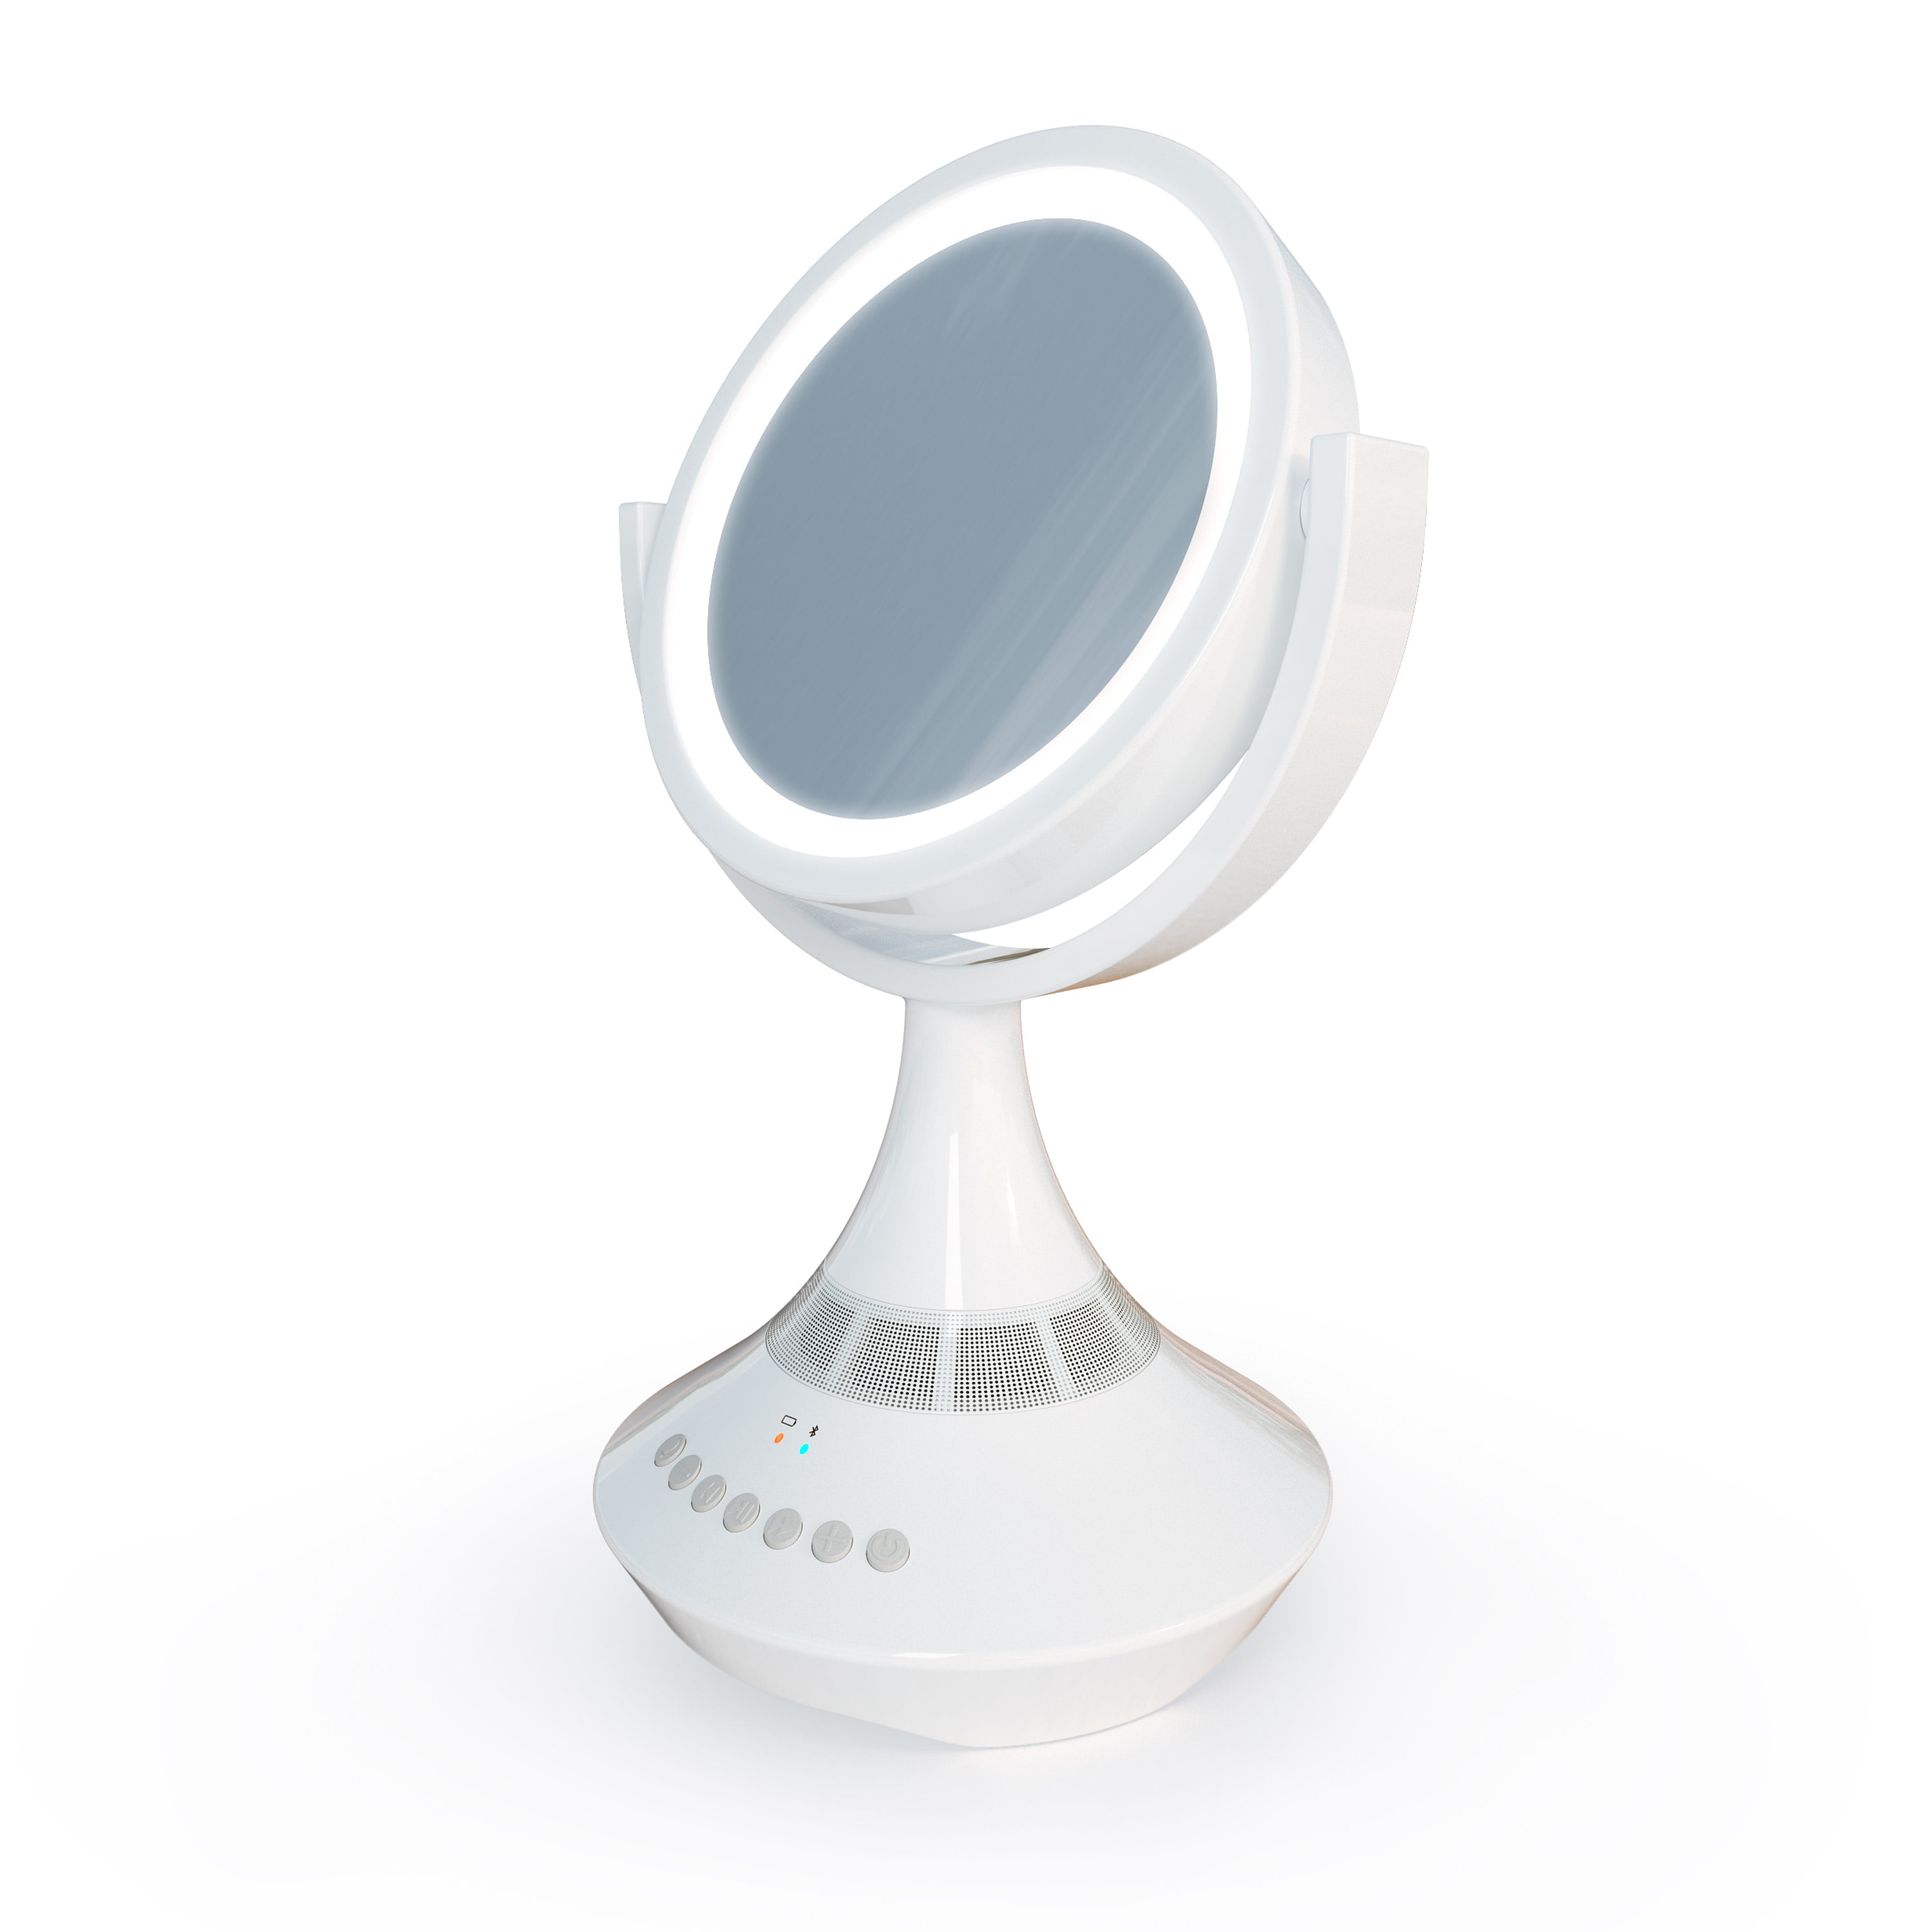 Atomi Bluetooth Double Sided Vanity, Small Cream Vanity Mirror With Lights And Bluetooth Speaker At Same Time